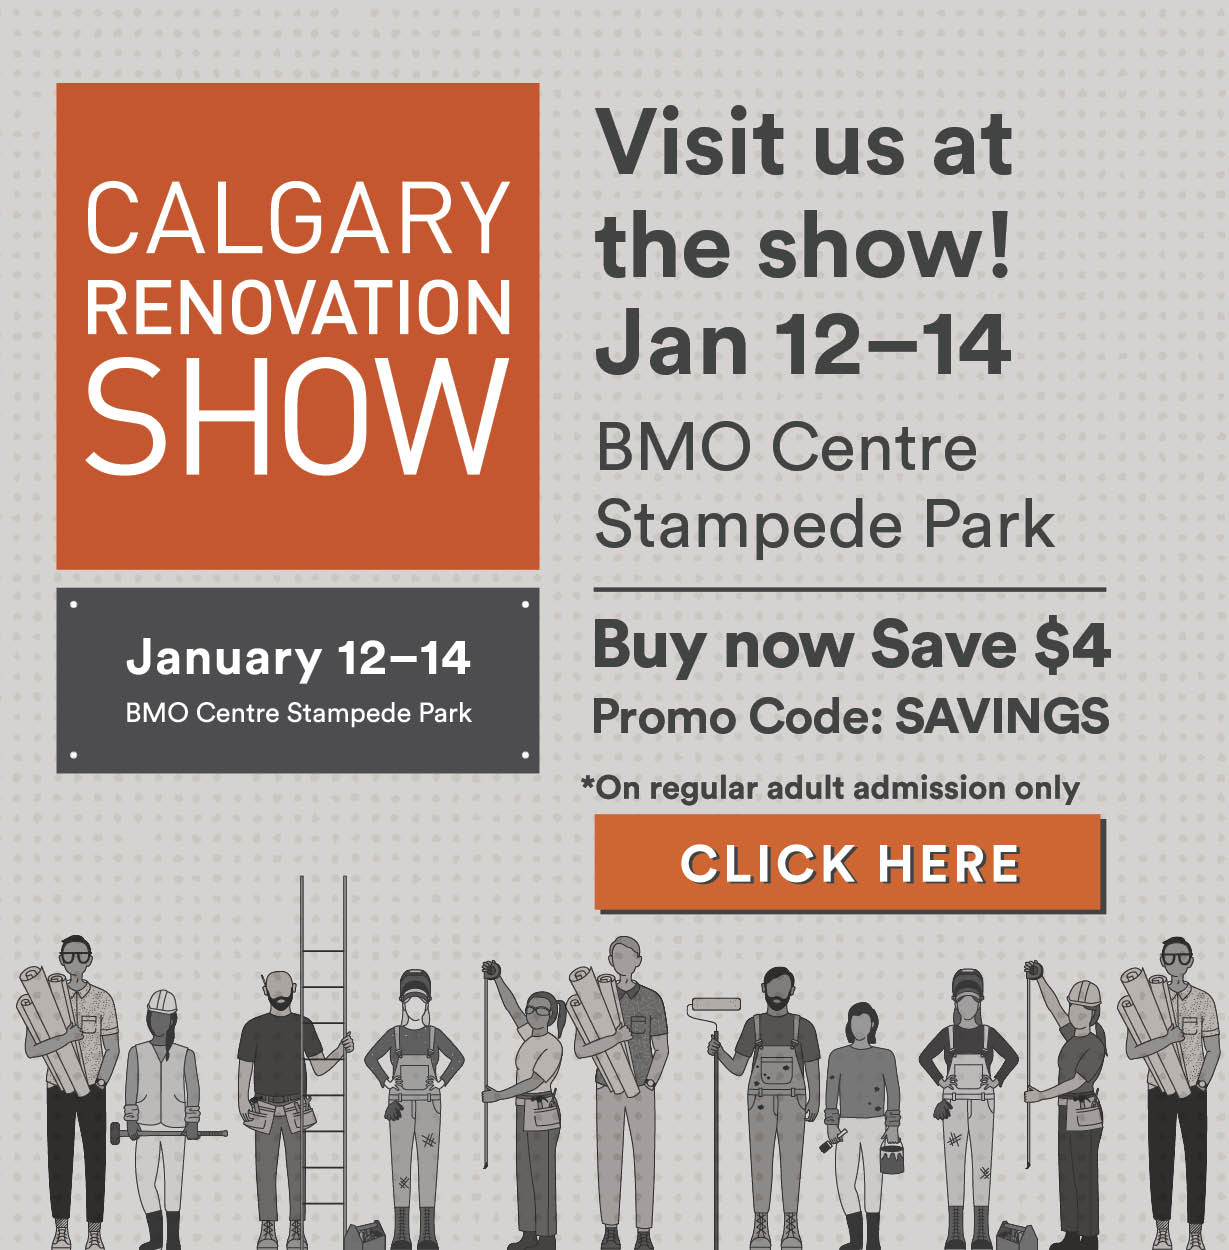 Calgary Renovation Show | Fire Ant Contracting